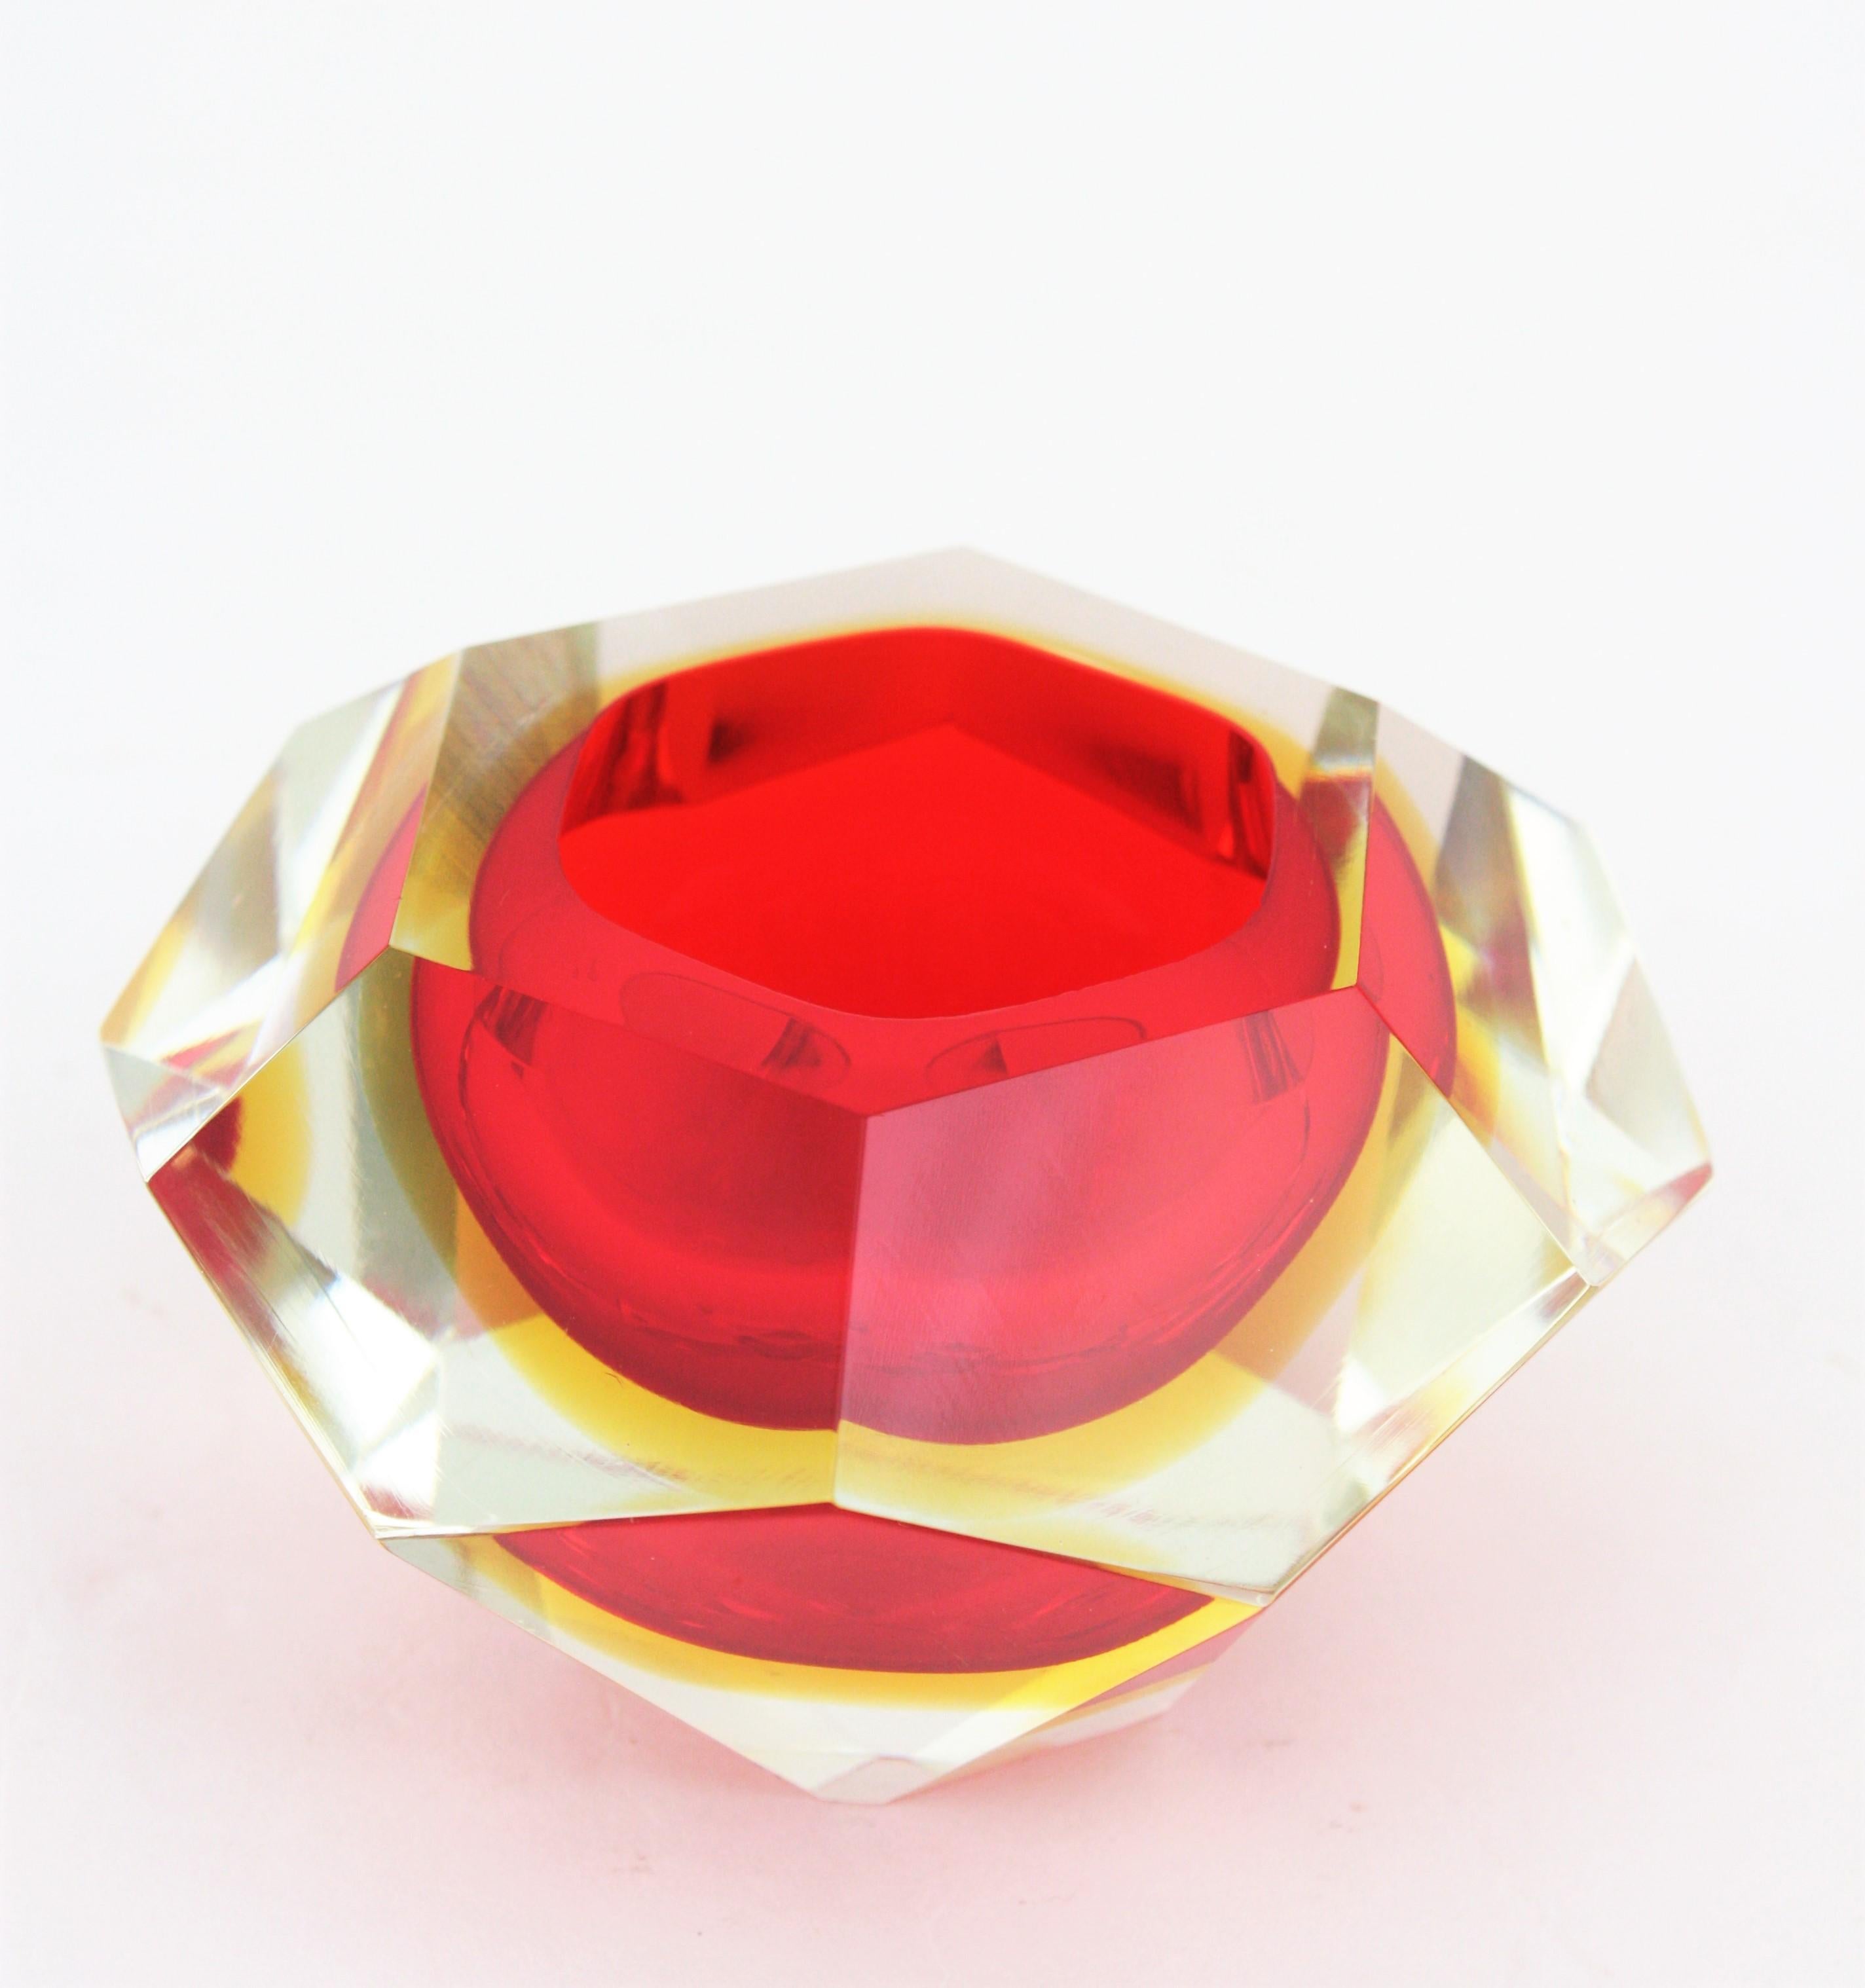 Mid-Century Modern Flavio Poli Murano Red, Yellow and Clear Faceted Glass Diamond Bowl or Ashtray For Sale